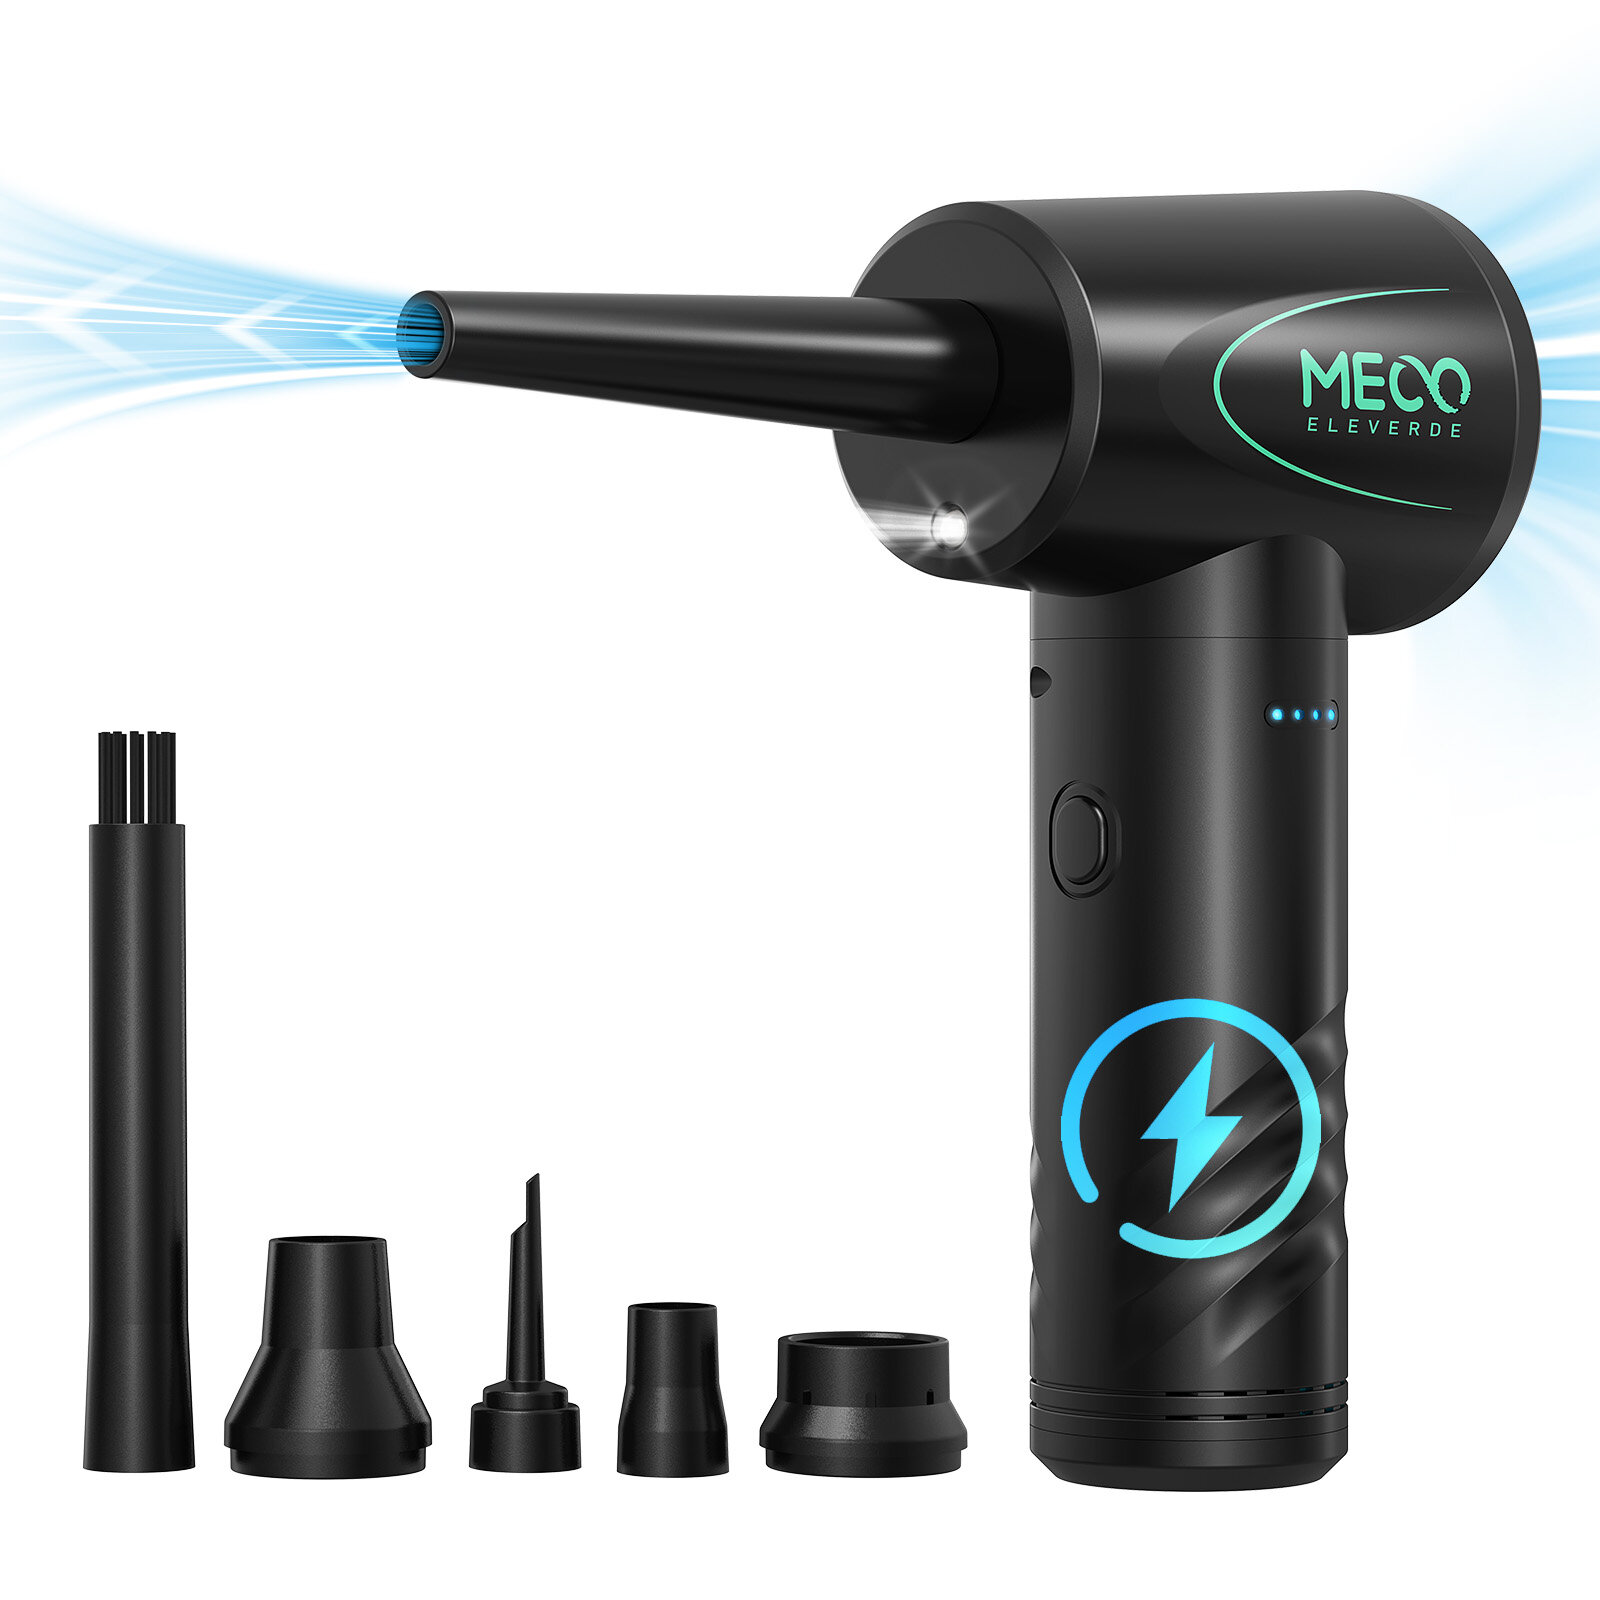 best price,meco,eleverde,compressed,air,duster,air,blower,eu,discount